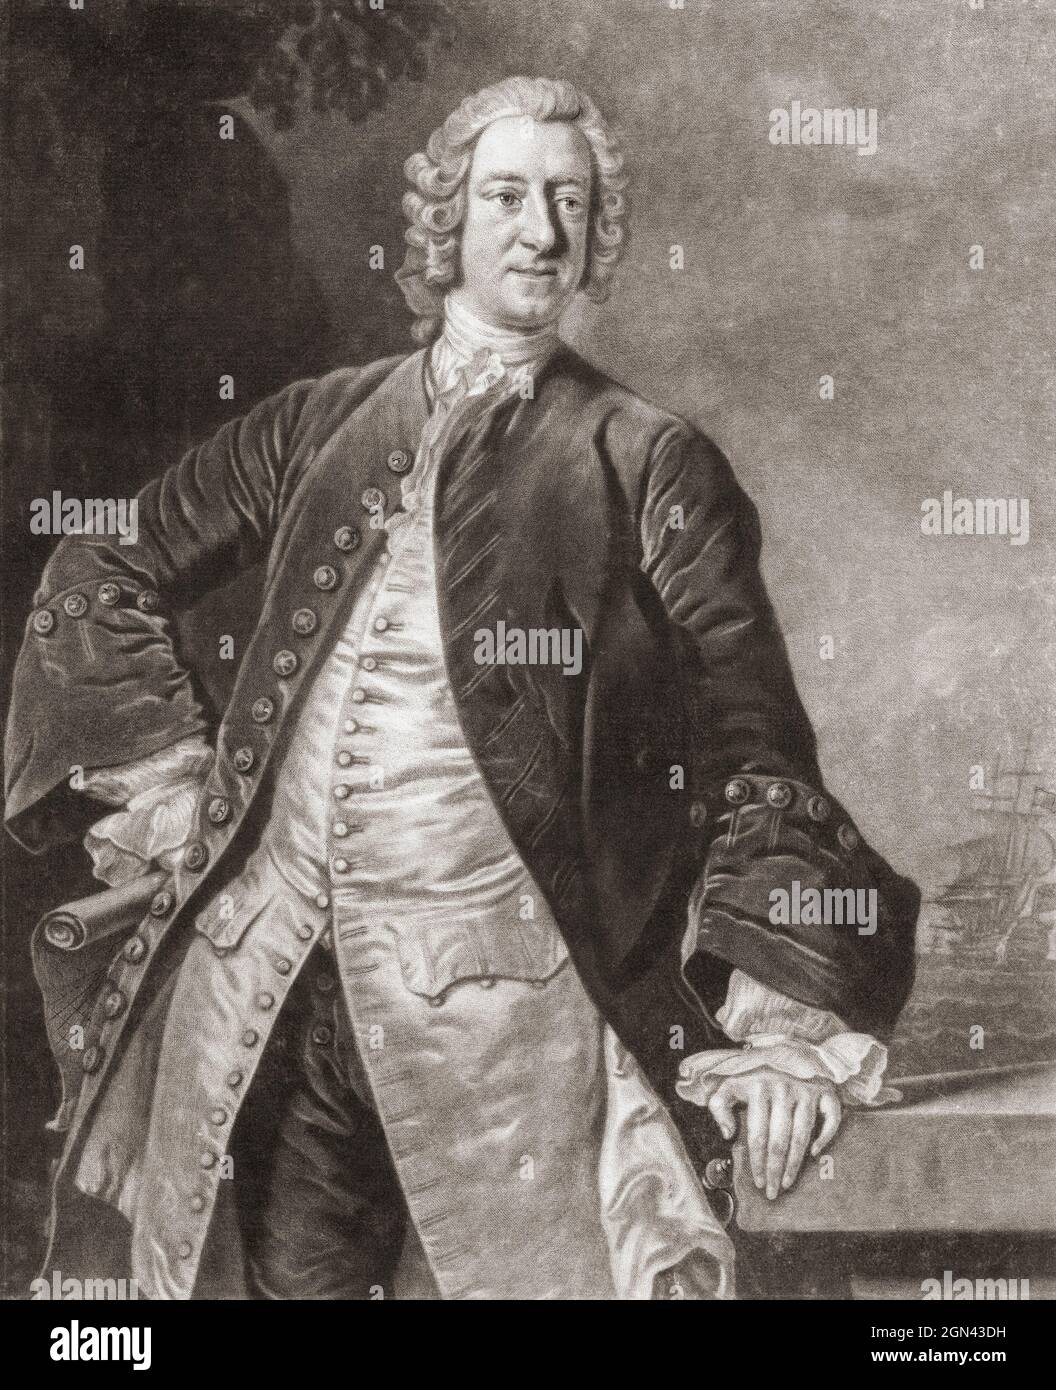 Edward Boscawen, 1711- 1761.  British Admiral and member of parliament. After an 18th century work by Allan Ramsay. Stock Photo